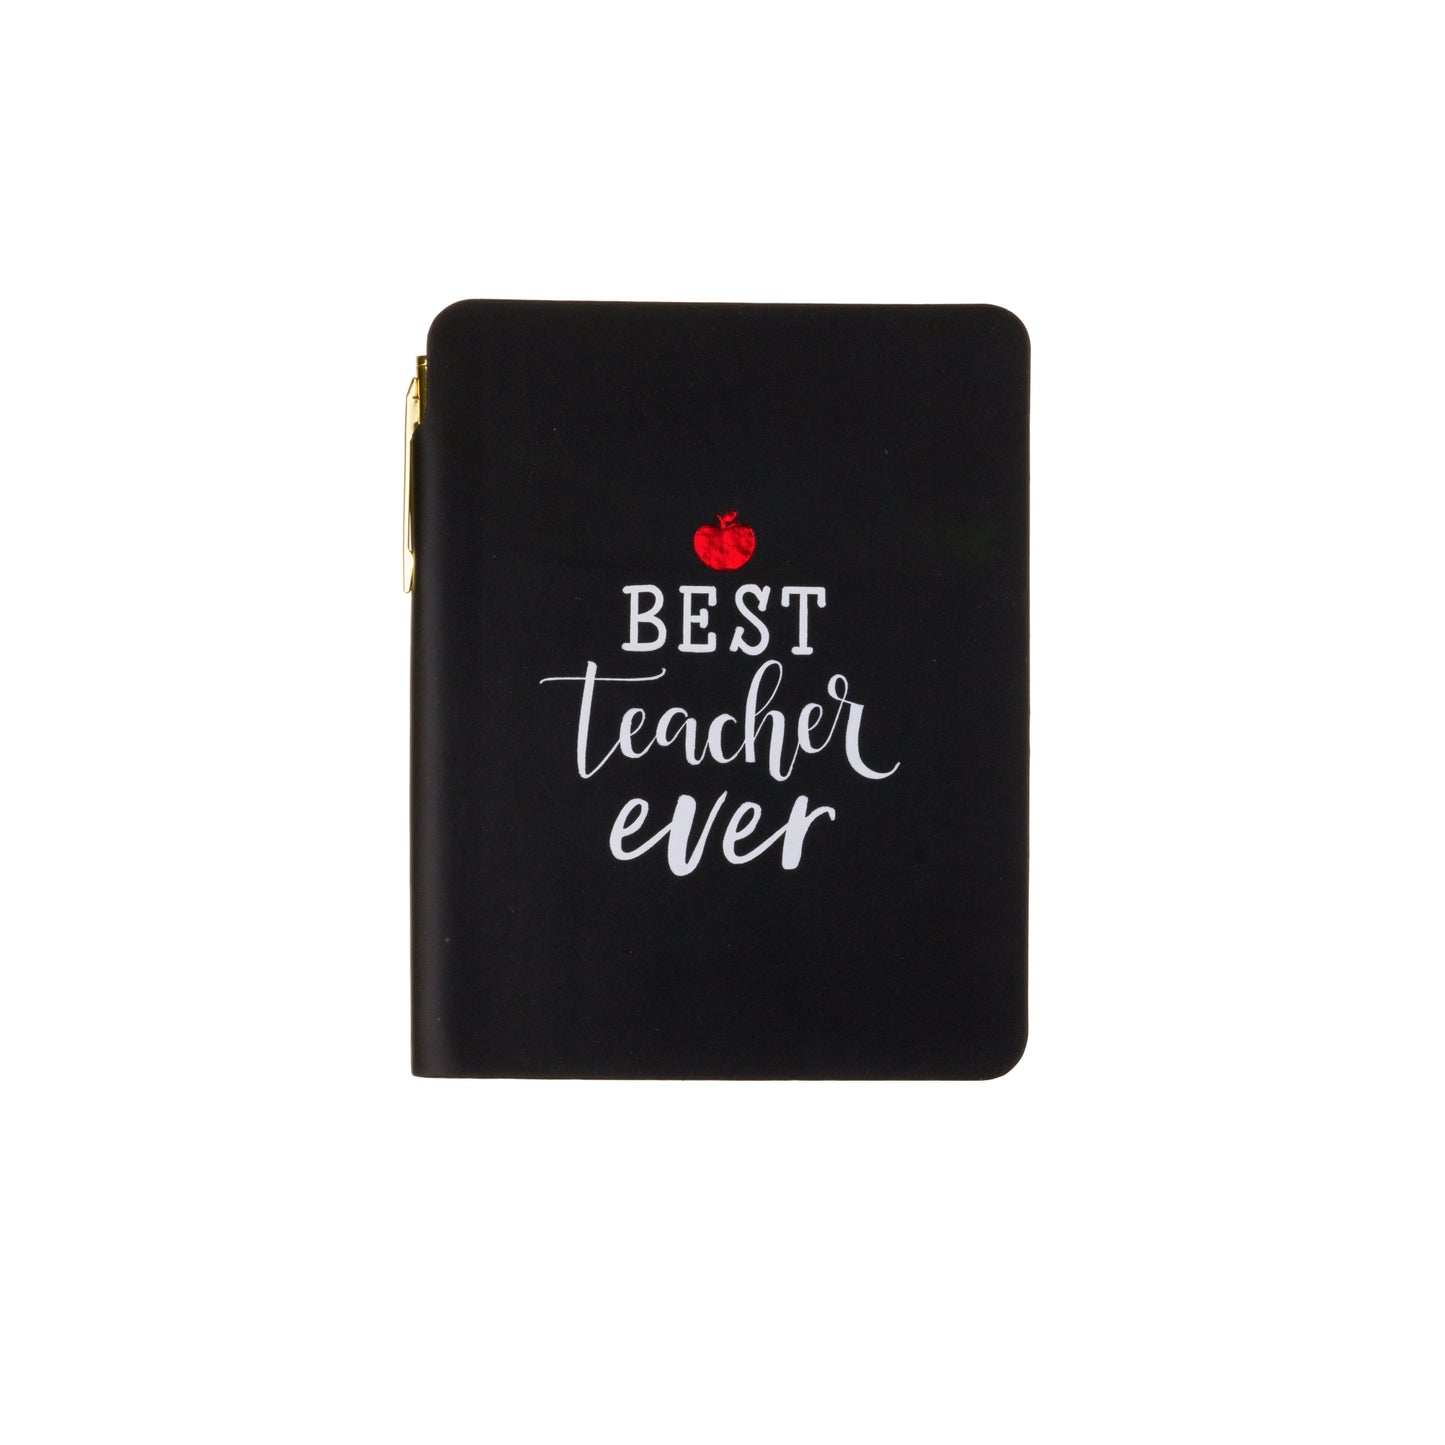 Eccolo Best Teacher Pocket Journal With Pen available at The Good Life Boutique